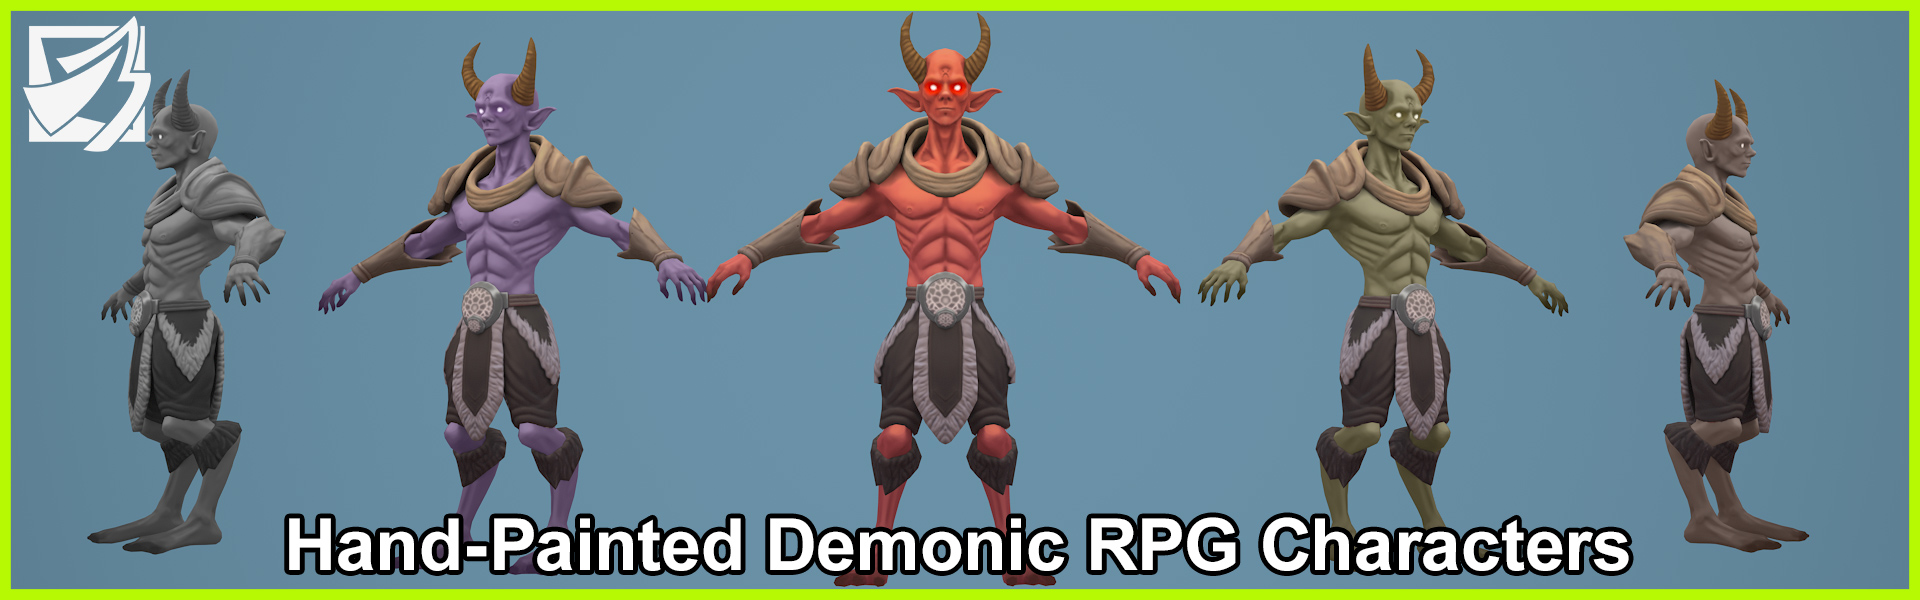 Hand-Painted Demonic RPG Characters